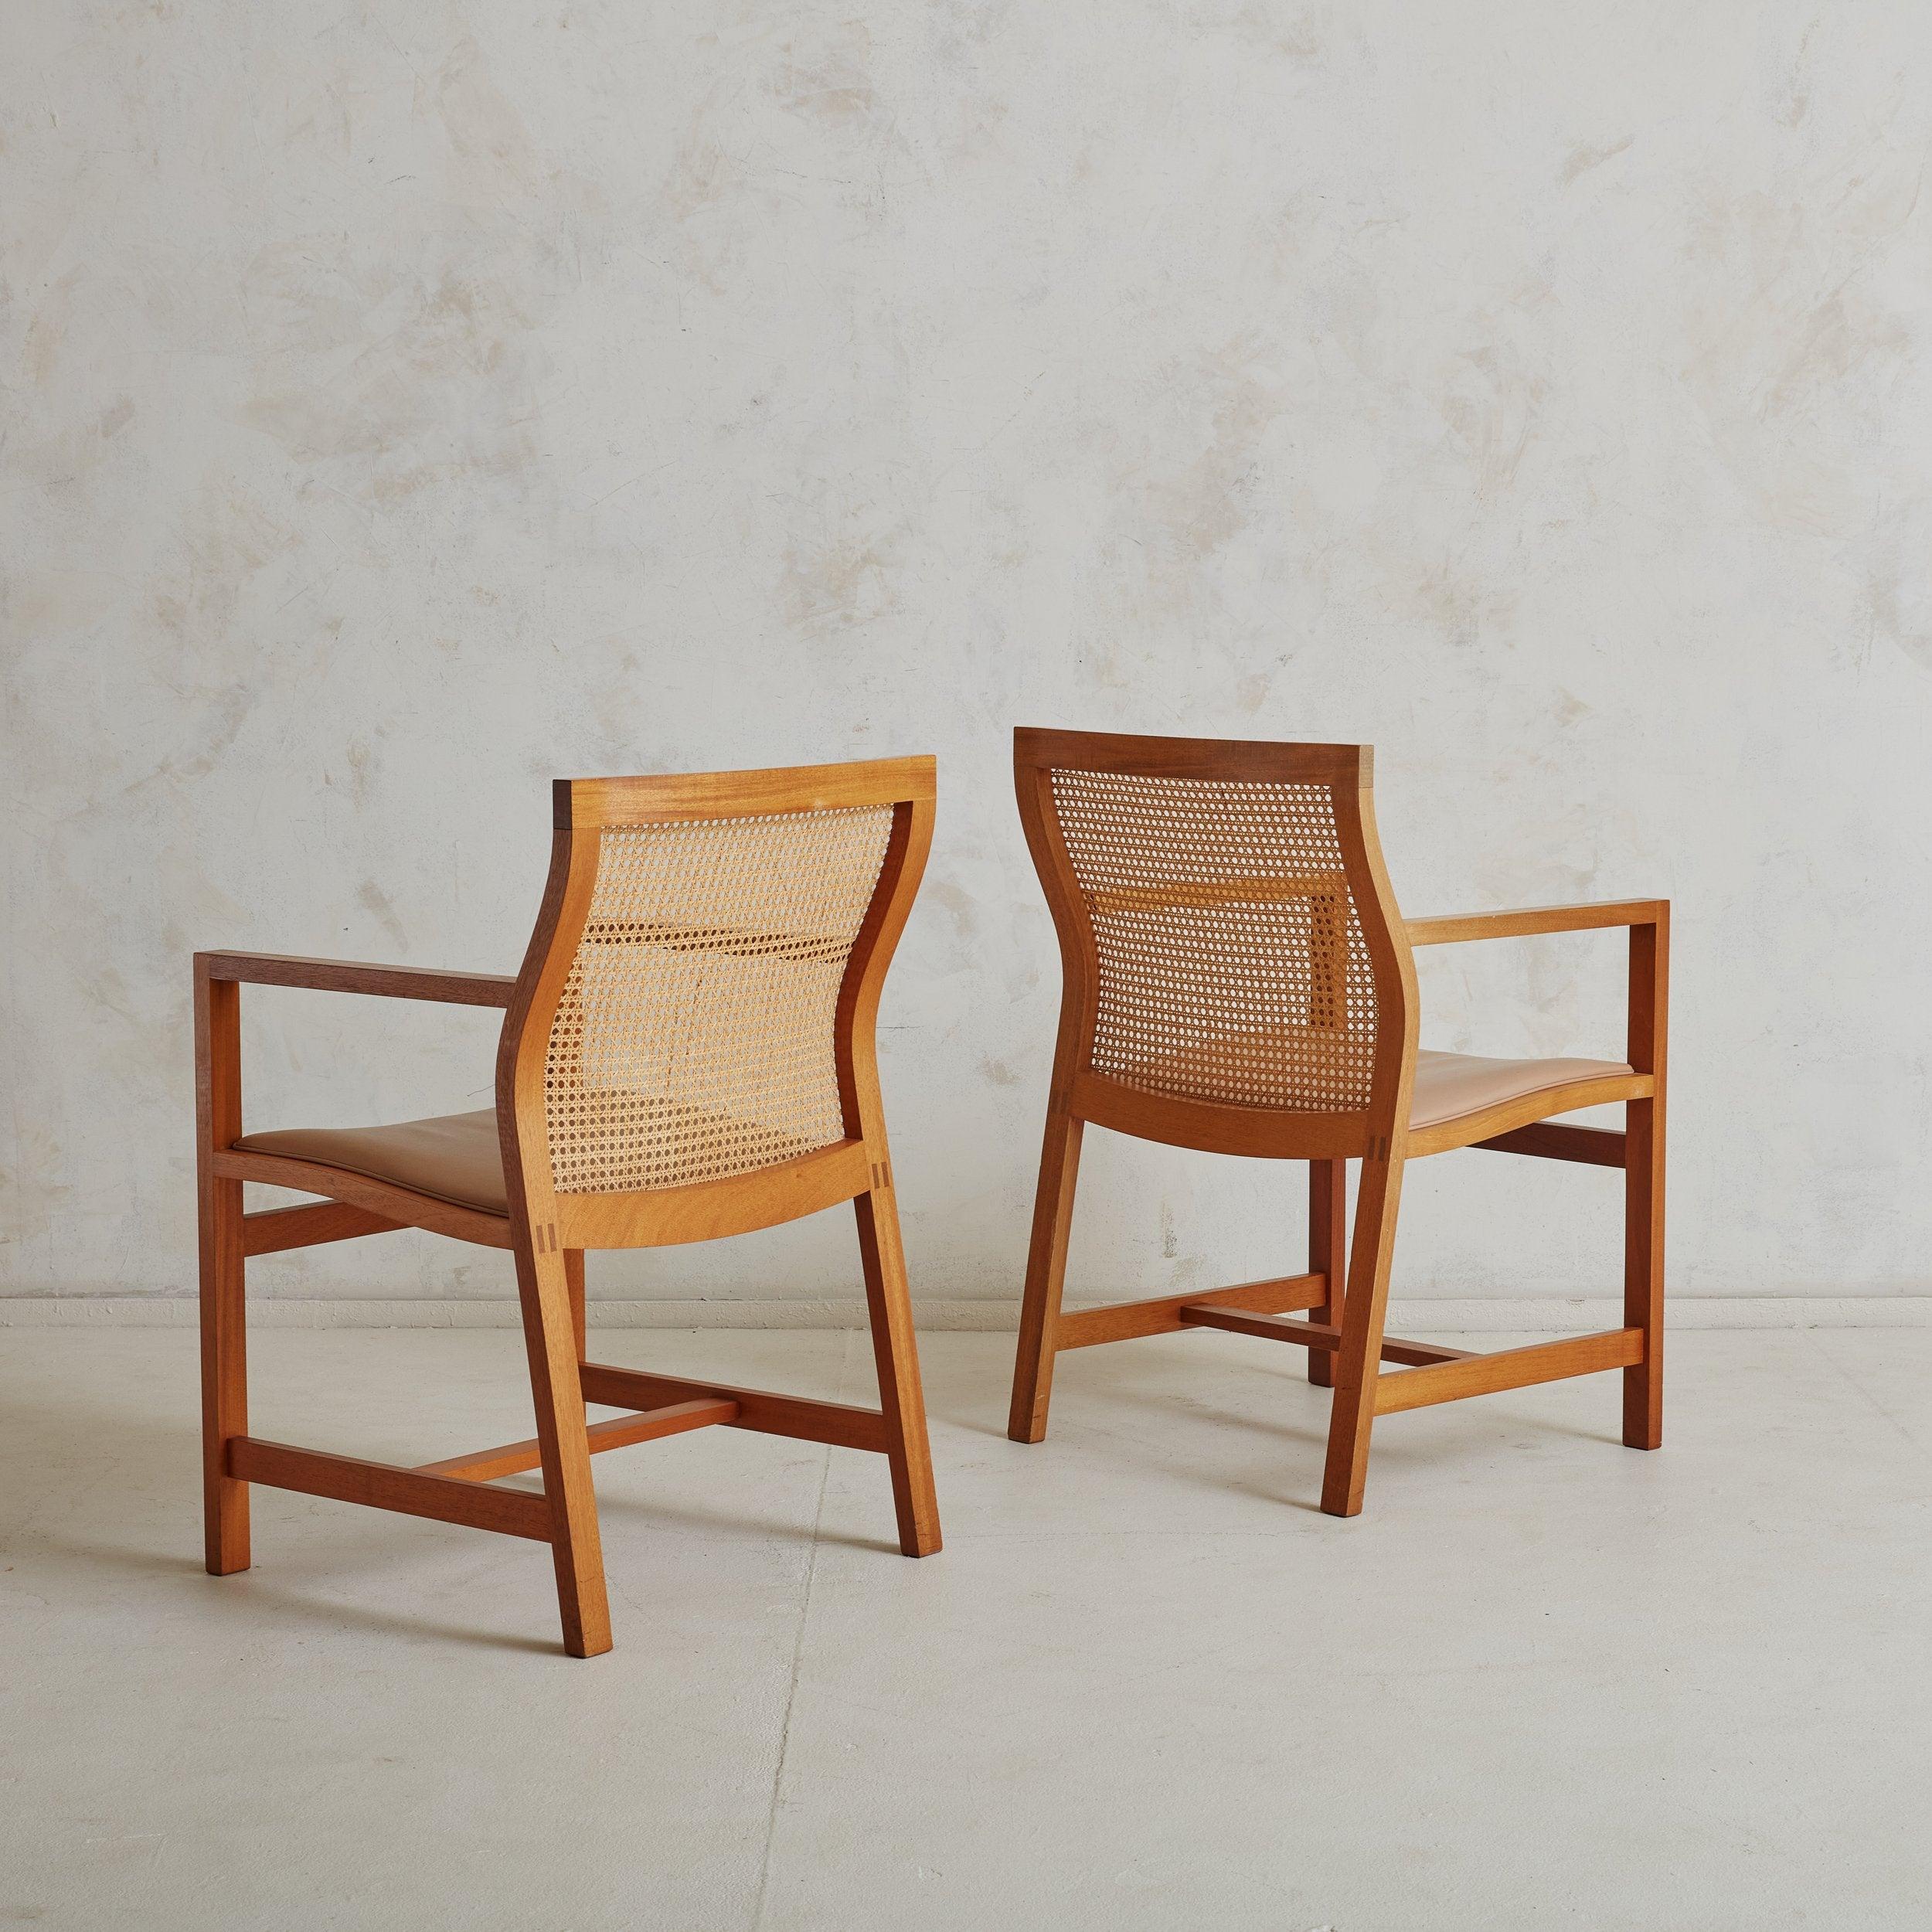 Scandinavian Modern Set of 6 Cane Dining Chairs by Rud Thygesen and Johnny Sorensen for Botium 1980s For Sale